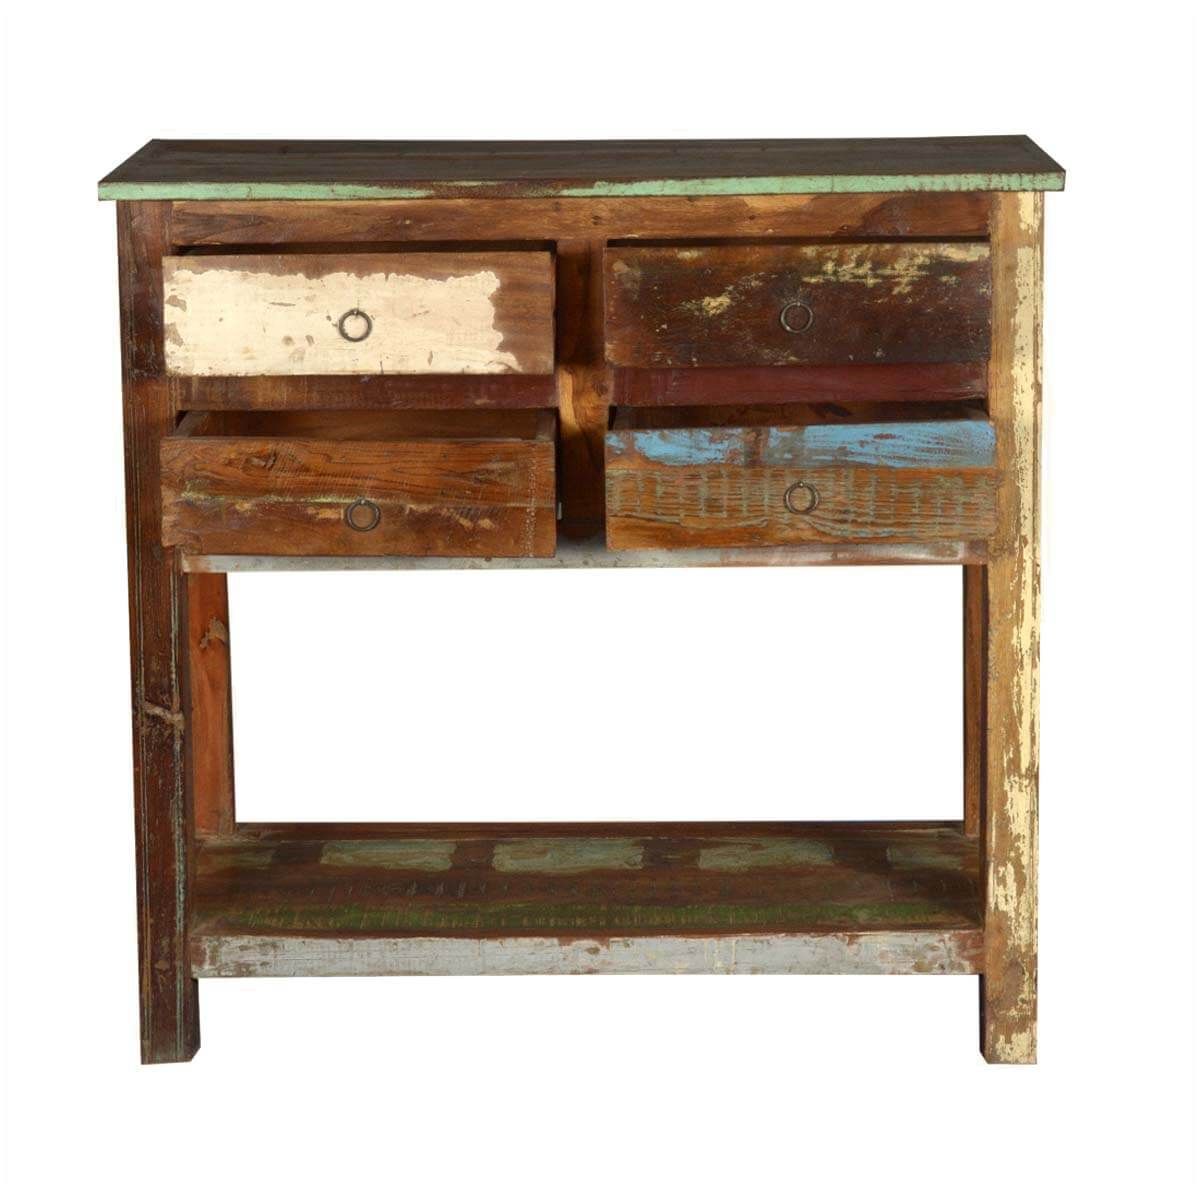 2 Tier Reclaimed Wood Console Table With 4 Drawers Throughout Reclaimed Wood Console Tables (Photo 18 of 20)